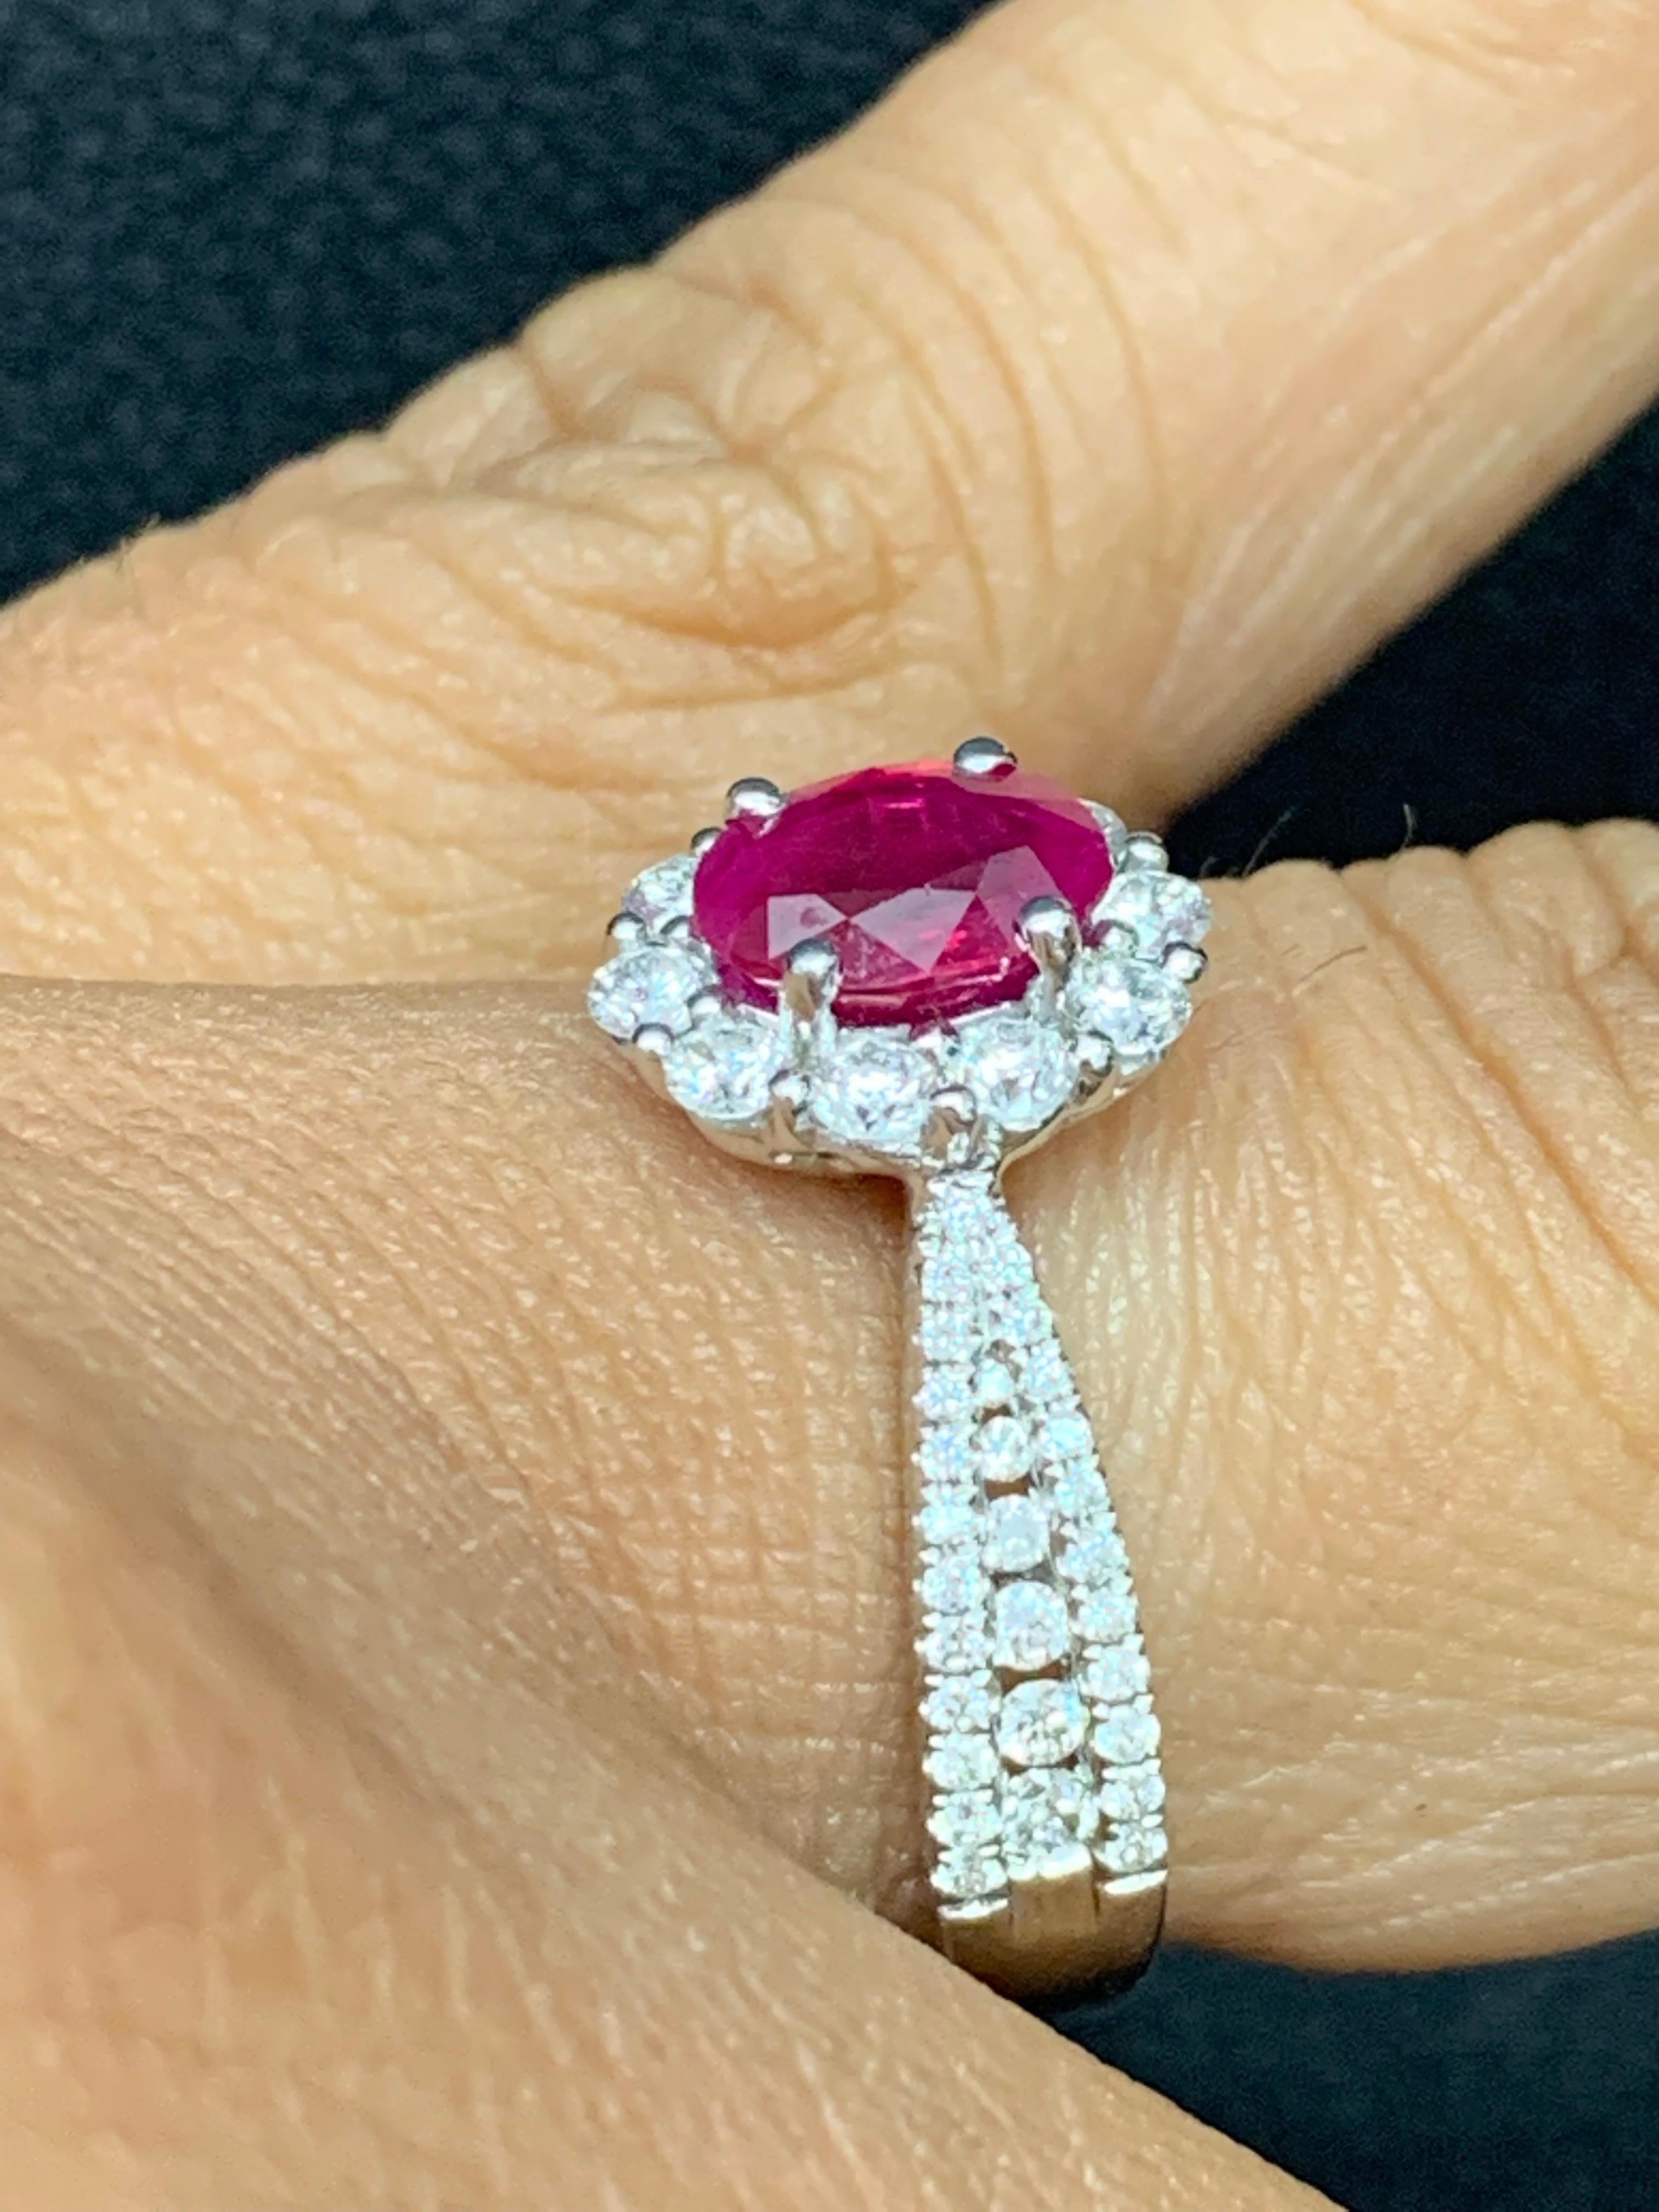 Features a 0.80 carat Oval cut ruby set in a 18k white gold setting that tapers as it gets to the center stone. The setting is micro-pave set with round brilliant melee diamonds on either side. 68 Accent diamonds weigh 0.64 carats in total. Size 6.5